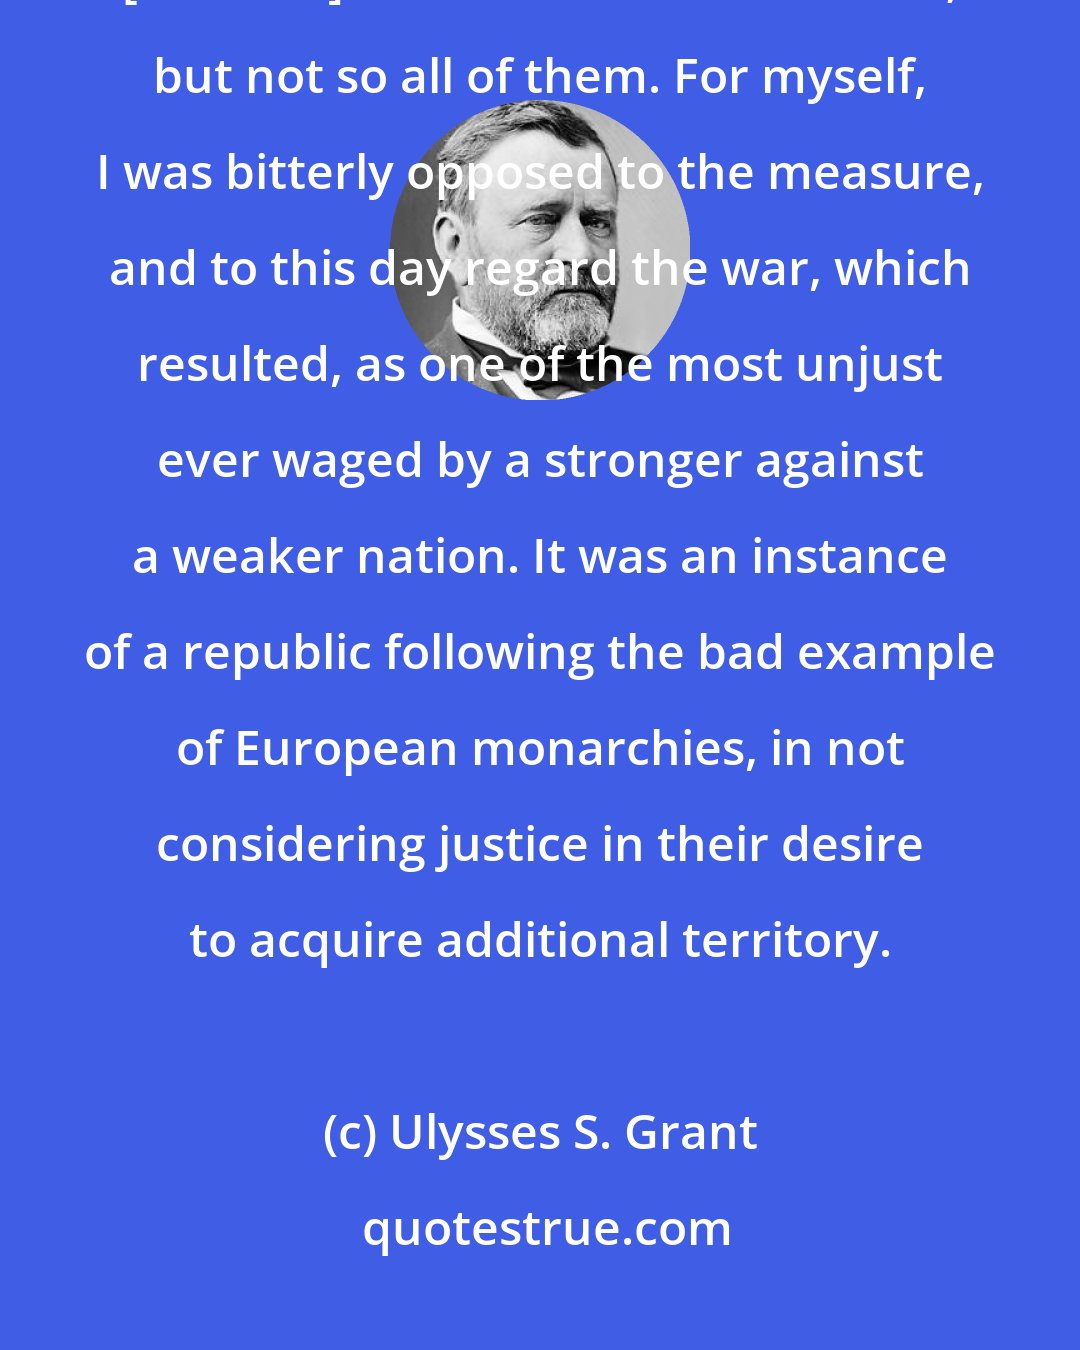 Ulysses S. Grant: Generally the officers of the army were indifferent whether the annexation [of Texas] was consummated or not; but not so all of them. For myself, I was bitterly opposed to the measure, and to this day regard the war, which resulted, as one of the most unjust ever waged by a stronger against a weaker nation. It was an instance of a republic following the bad example of European monarchies, in not considering justice in their desire to acquire additional territory.